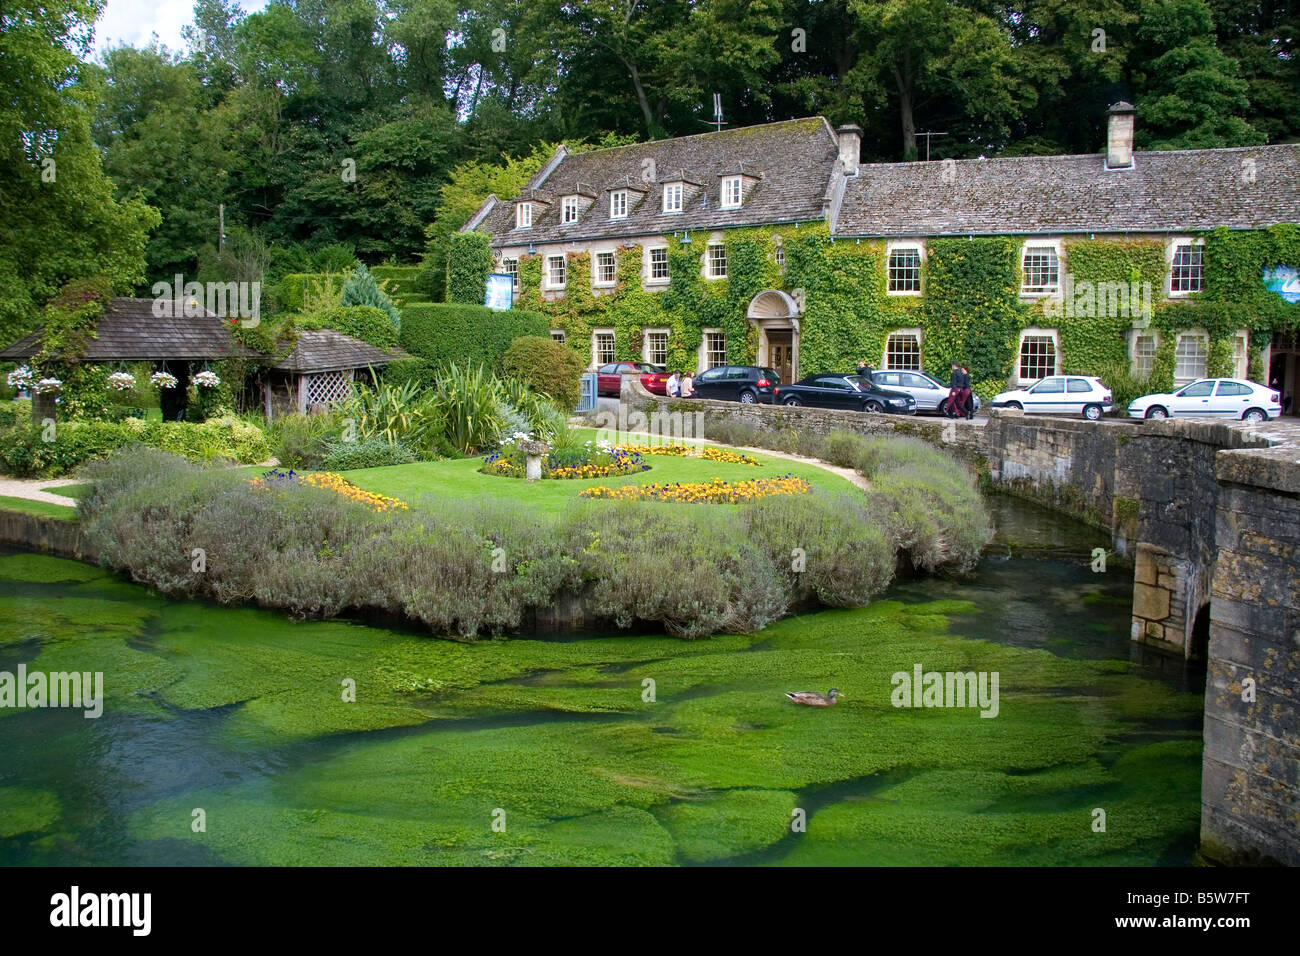 Trout farm in the village of Bibury Gloucestershire England Stock Photo